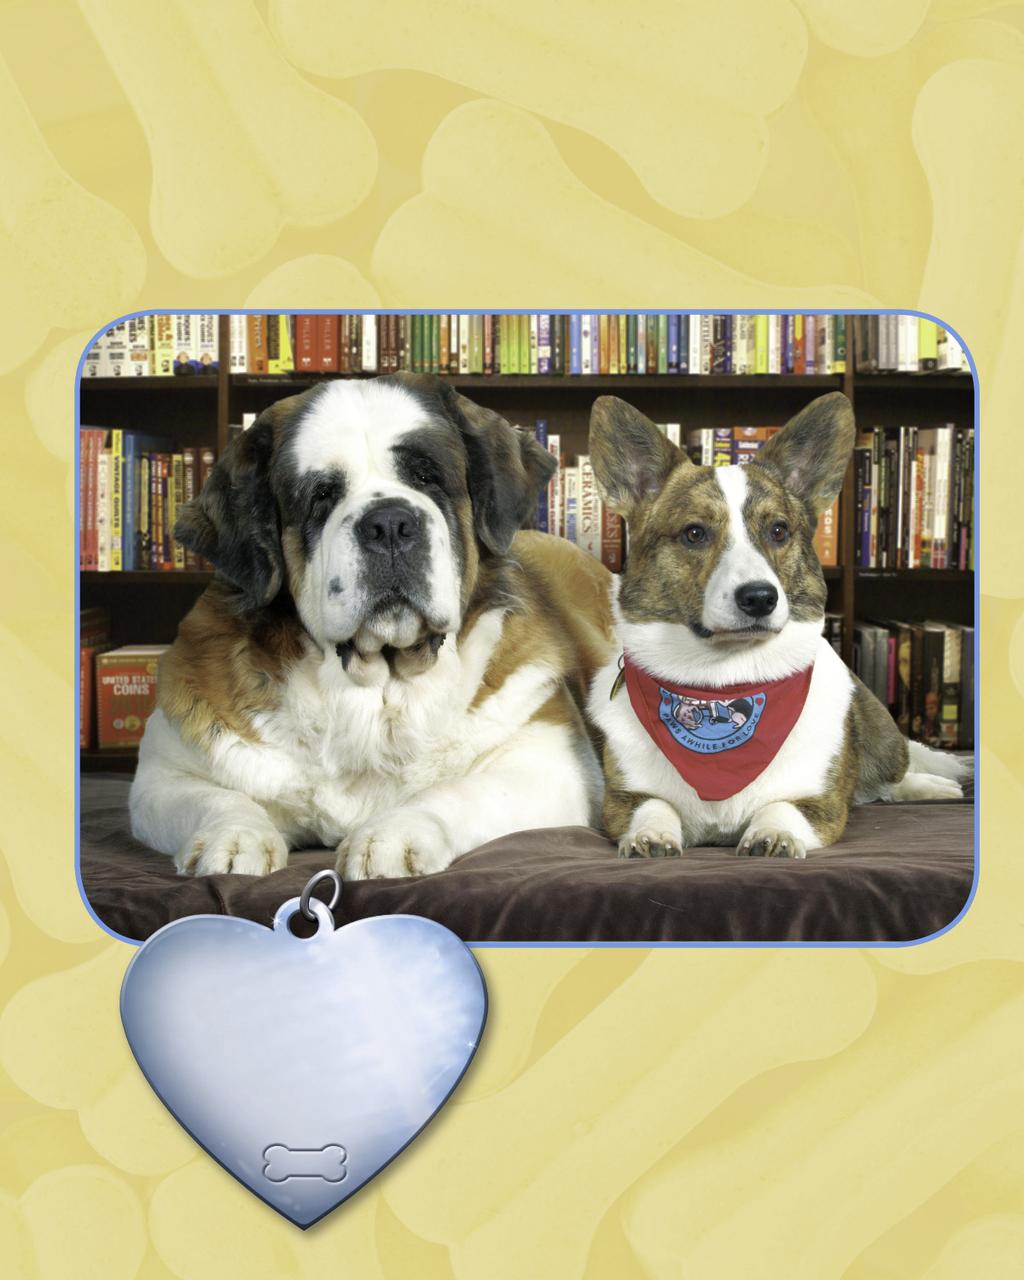 The relationship Katie has with the children that come to the library is typical of a Saint Bernard. These dogs are known for being gentle, calm, and well behaved.